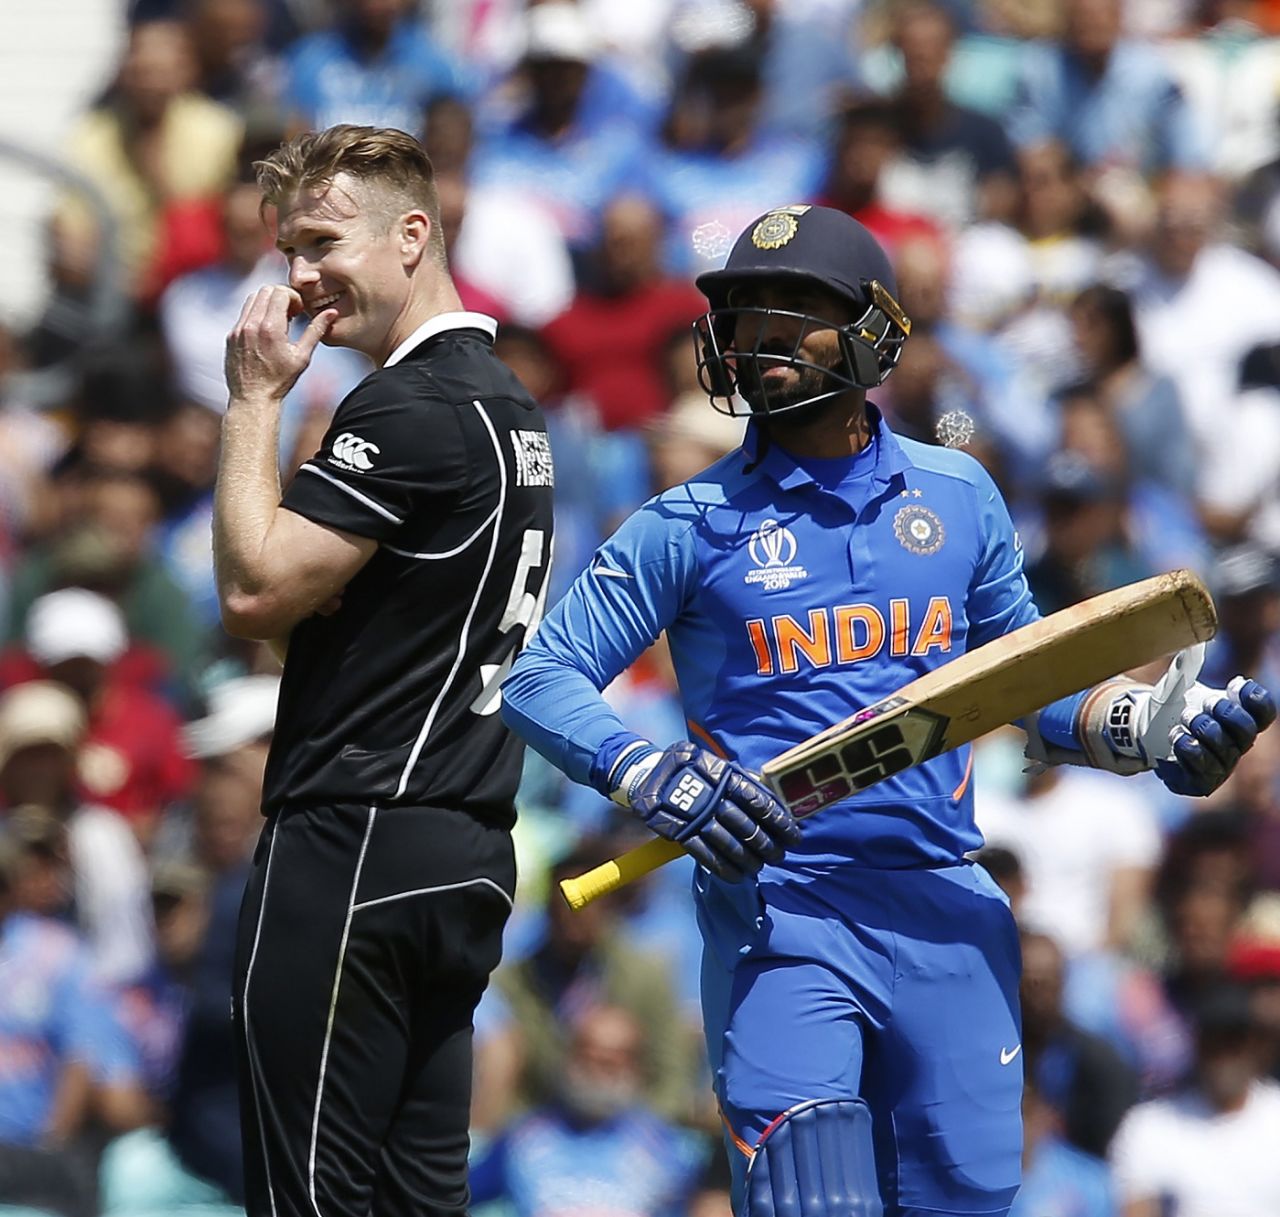 James Neesham is half embarrassed at getting Dinesh Karthik out with a leg-stump half-volley, India vs New Zealand, World Cup 2019, warm-up, The Oval, May 25, 2019